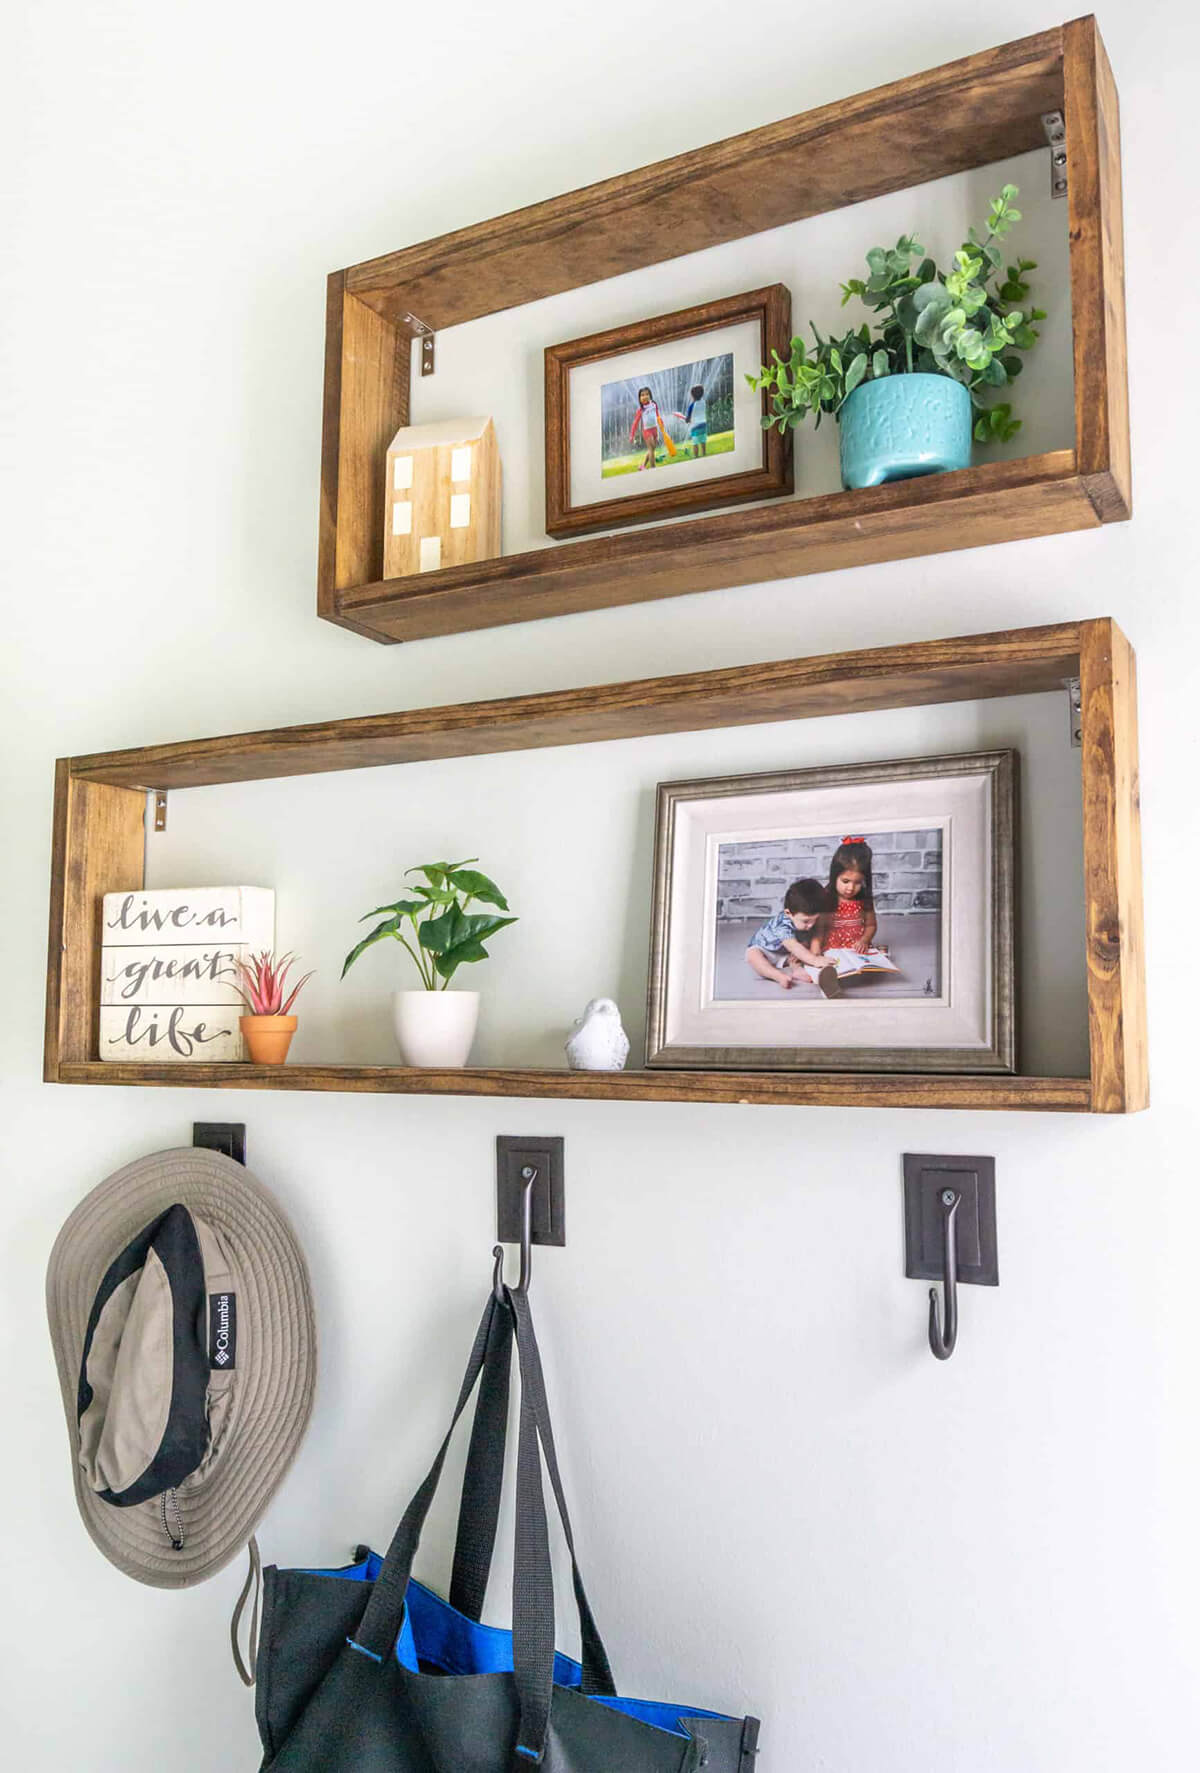 15 Awesome DIY Rustic Home Décor Ideas You're Going To Want To Make